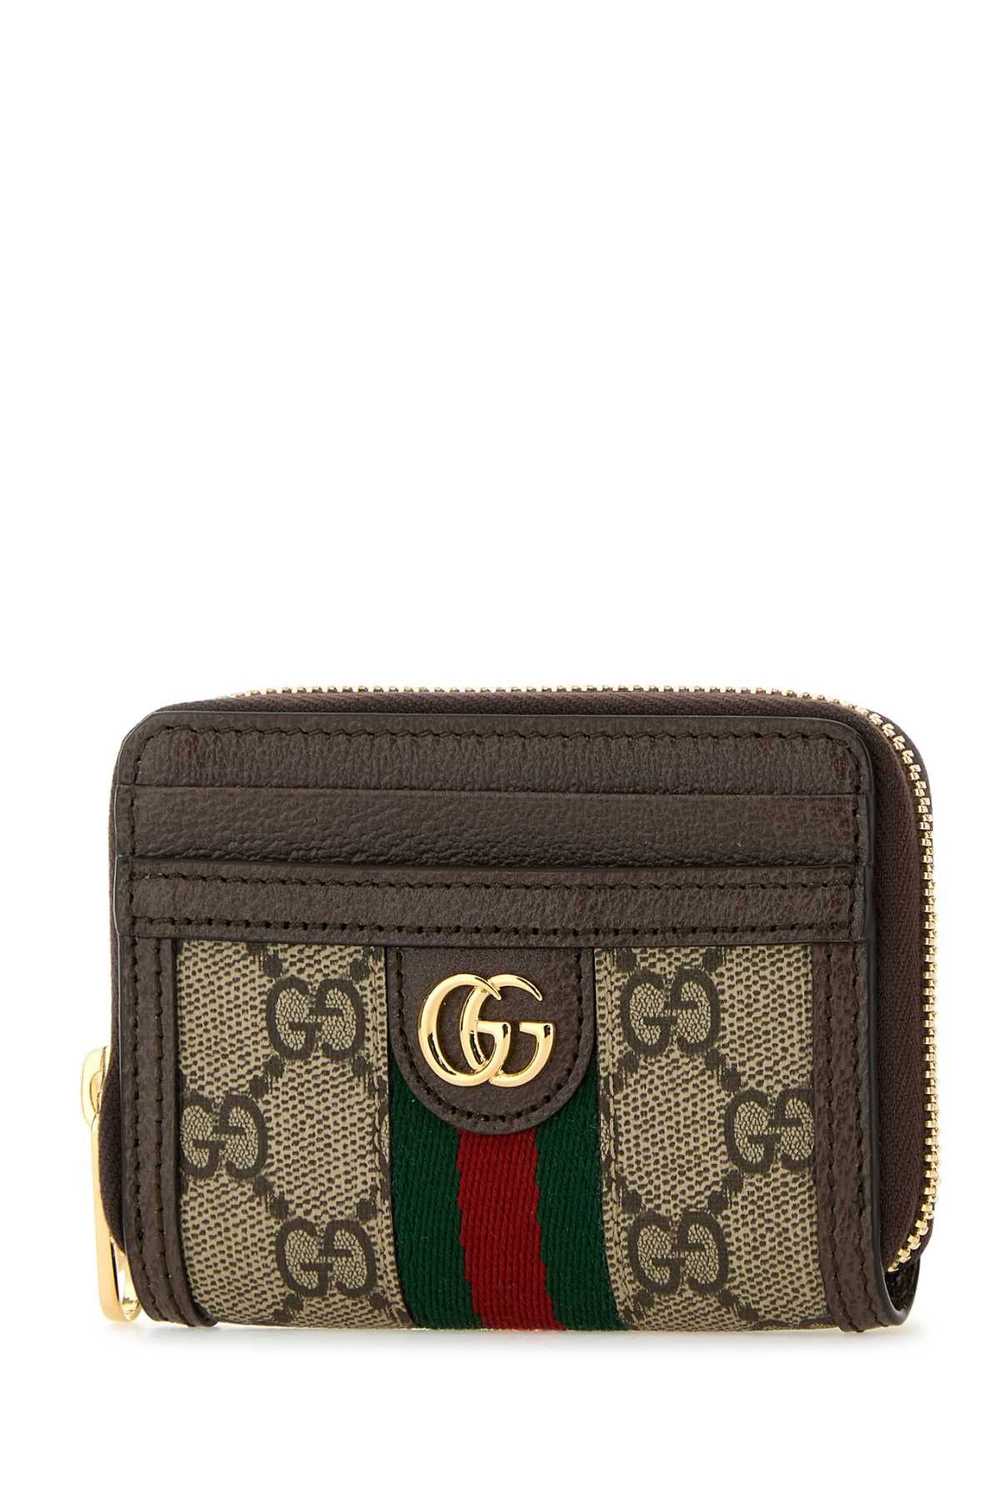 Gucci Gg Supreme Fabric Ophidia Wallet - image 2